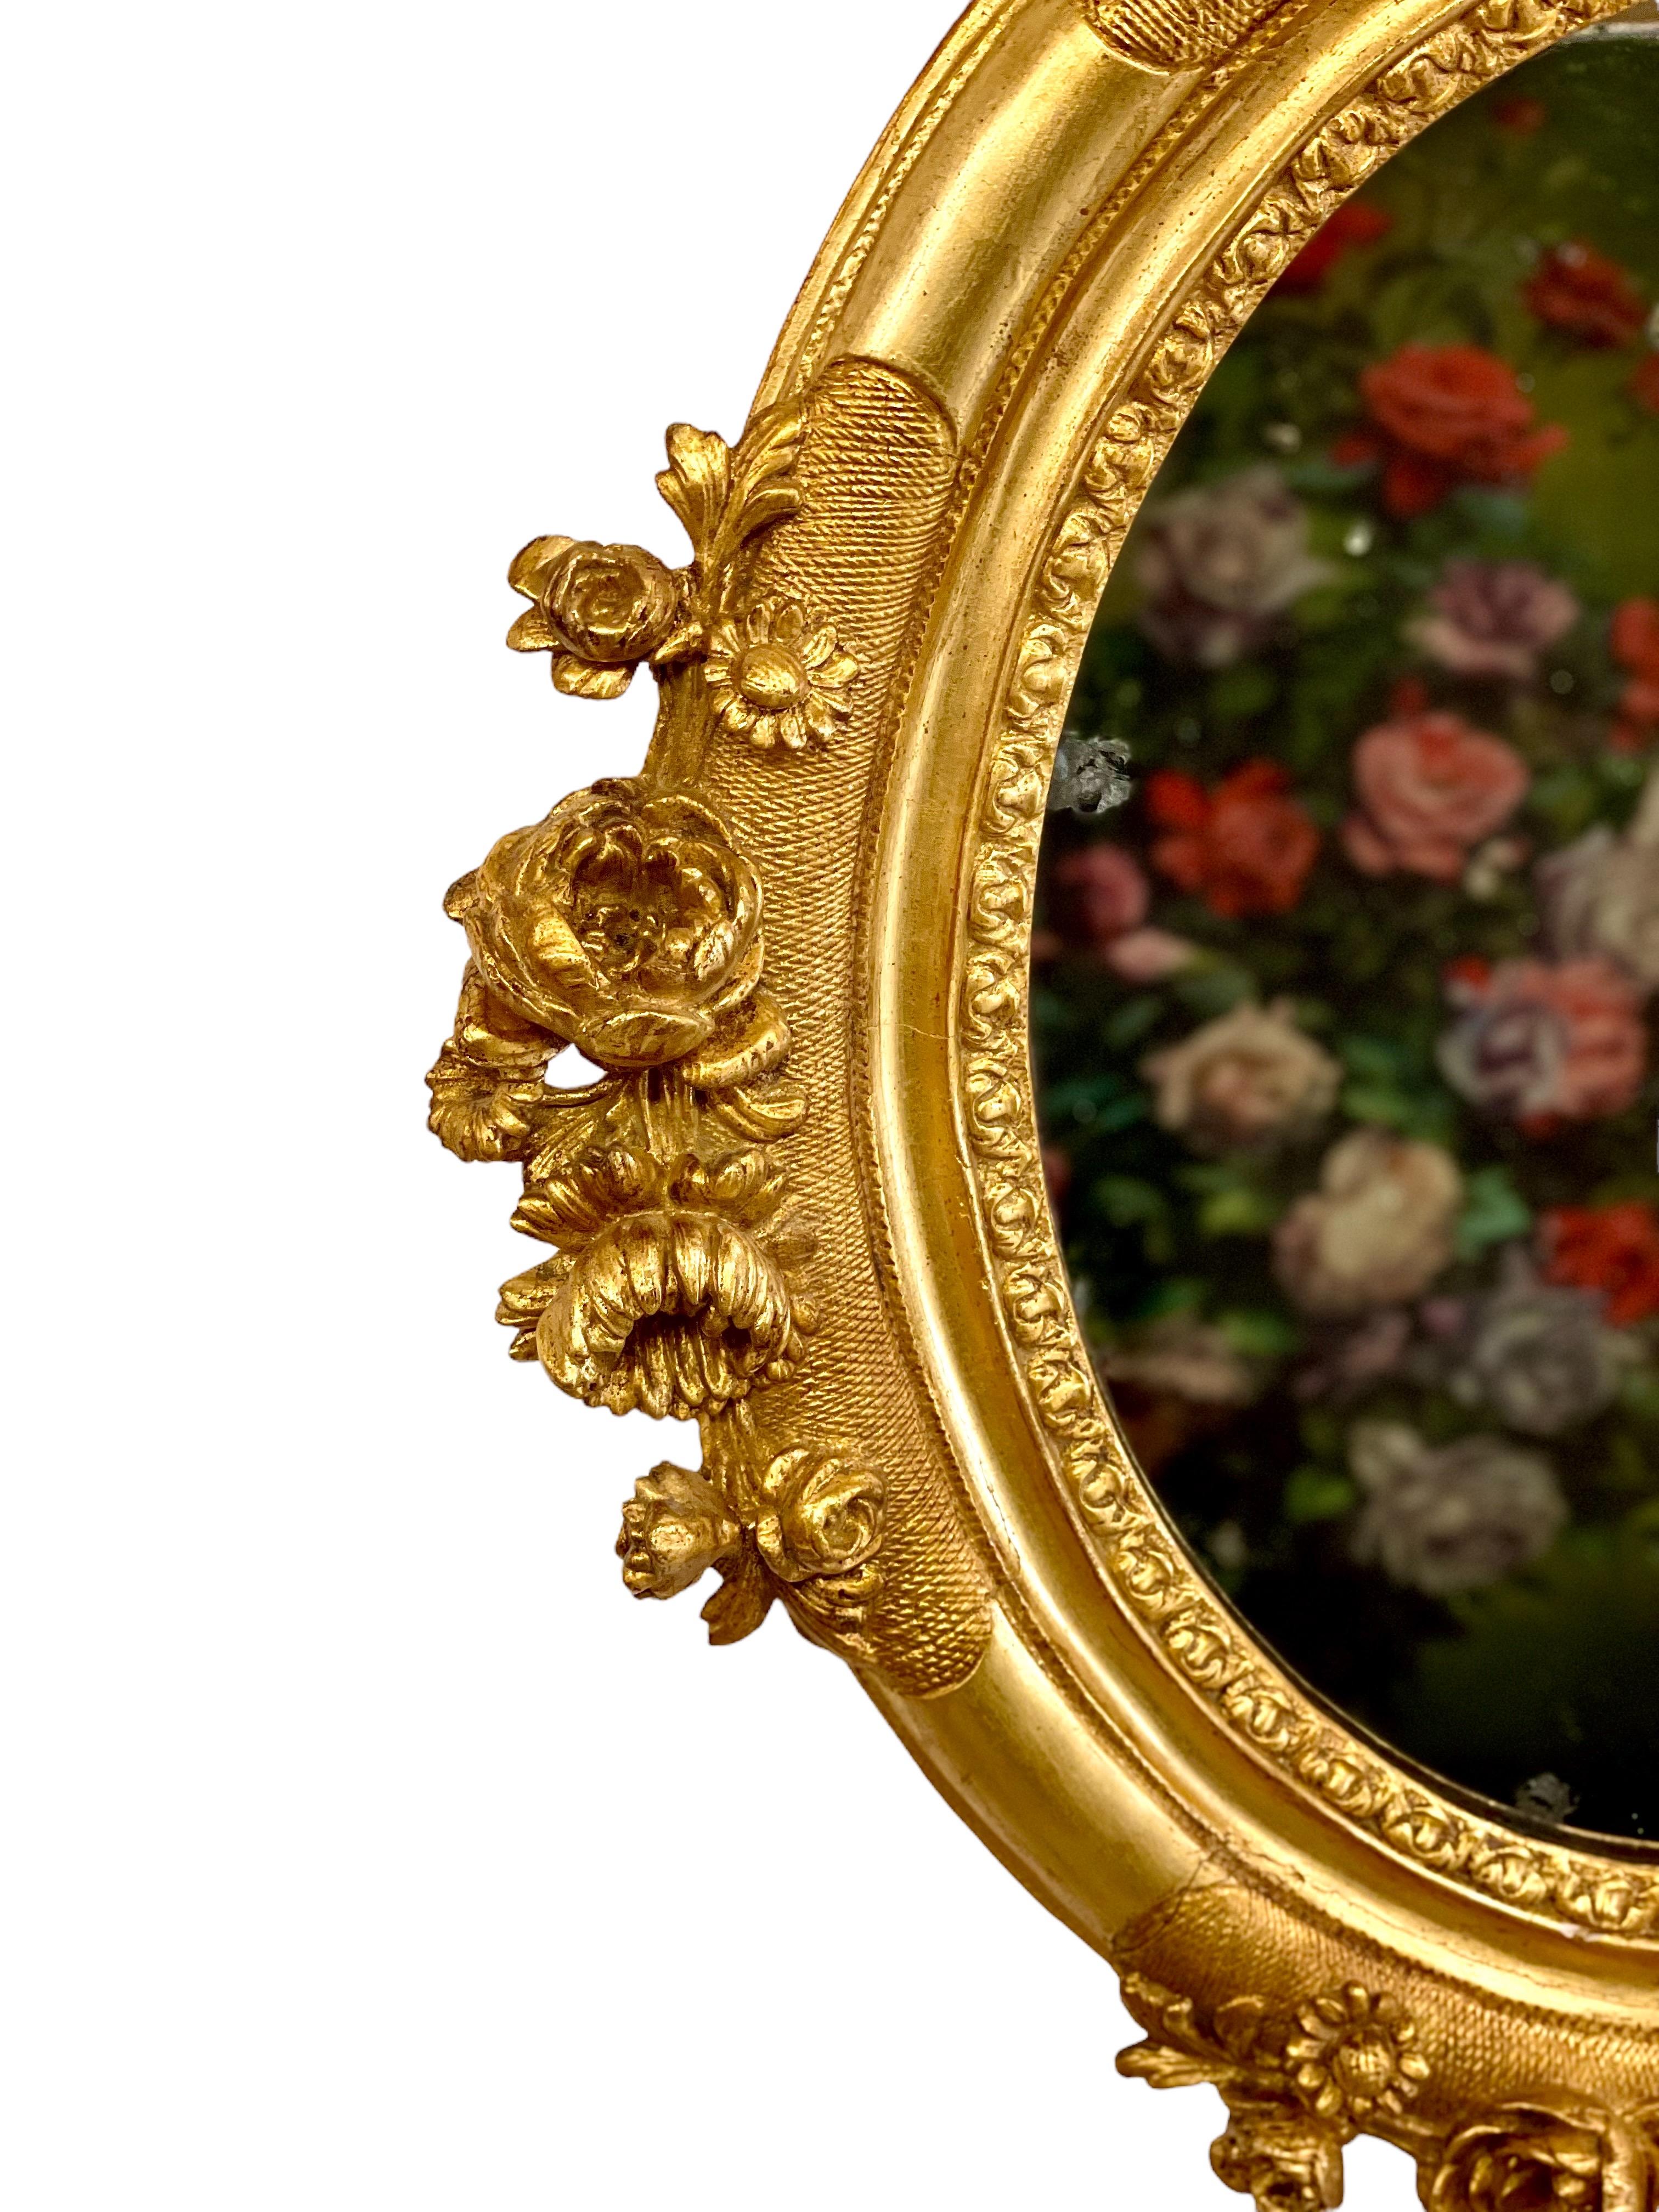 A beautifully carved gilt wood and stucco framed Louis XVI style oval mirror, embellished with floral motifs of paeonies, daisies and chrysanthemums in high relief on its four sides. This elegant mirror would be a striking adornment on a bedroom